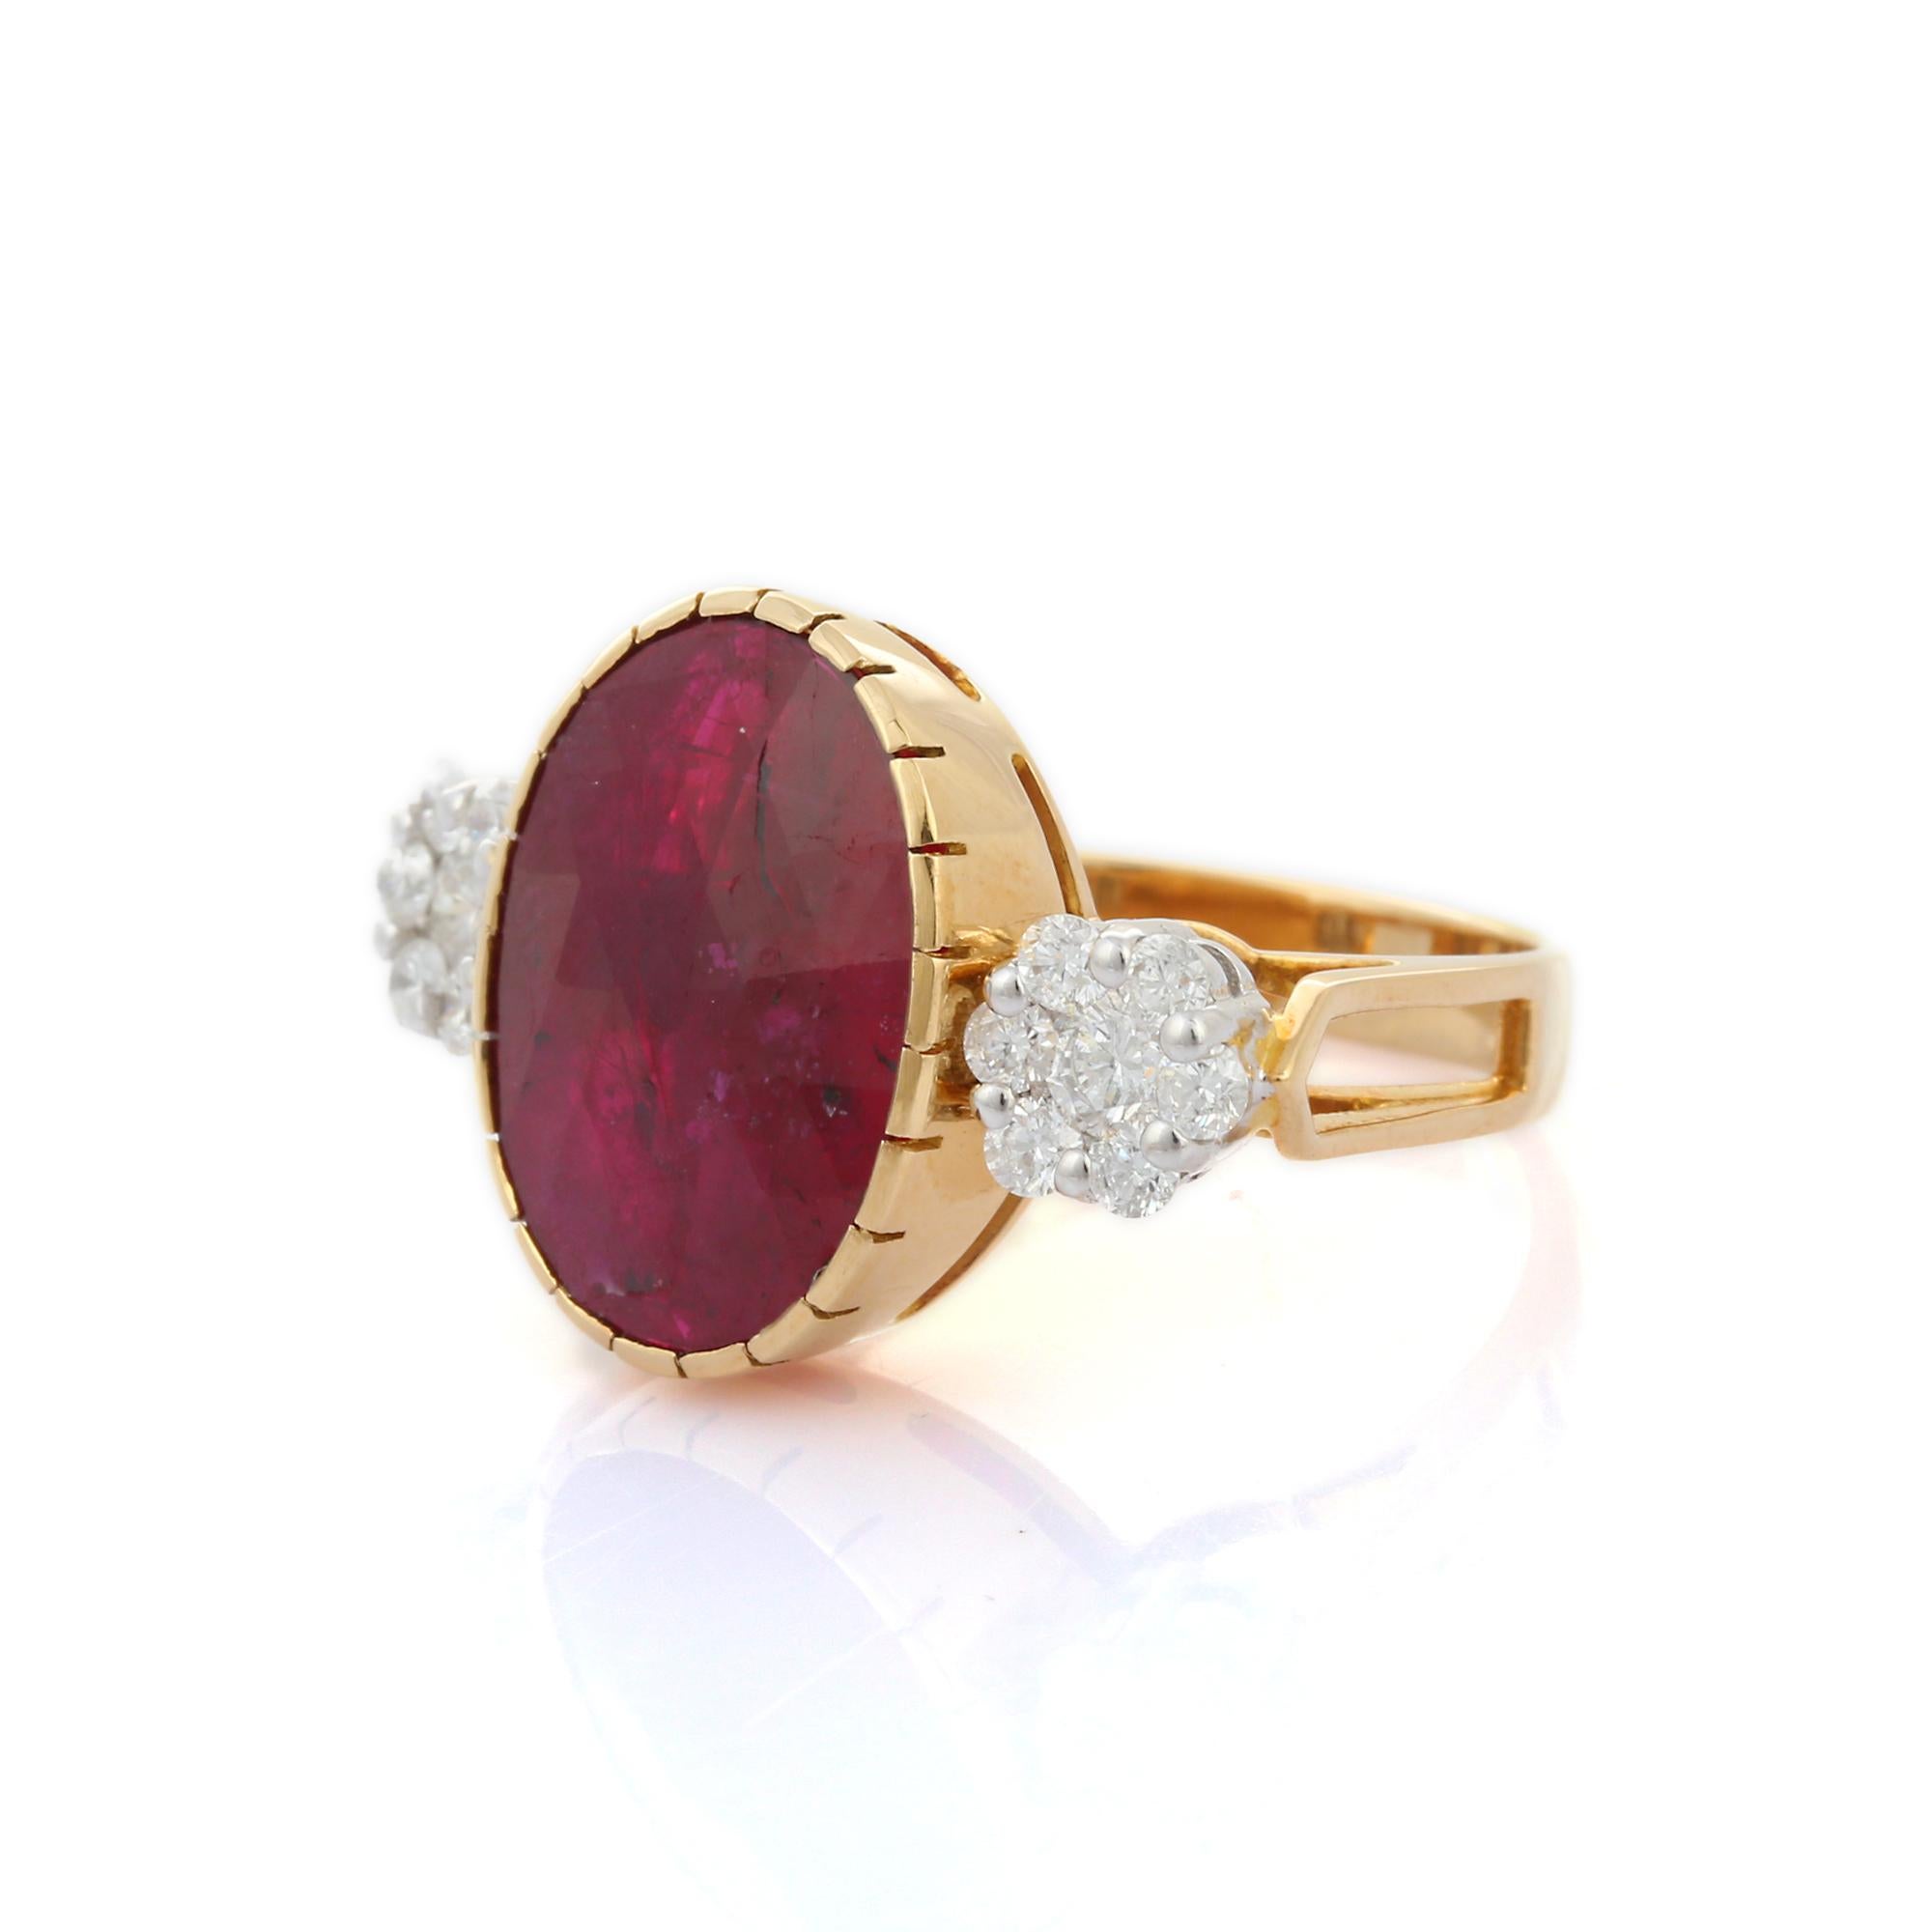 For Sale:  2.65 Carat Oval Cut Ruby Diamond Engagement Ring in 18 Karat Yellow Gold 4